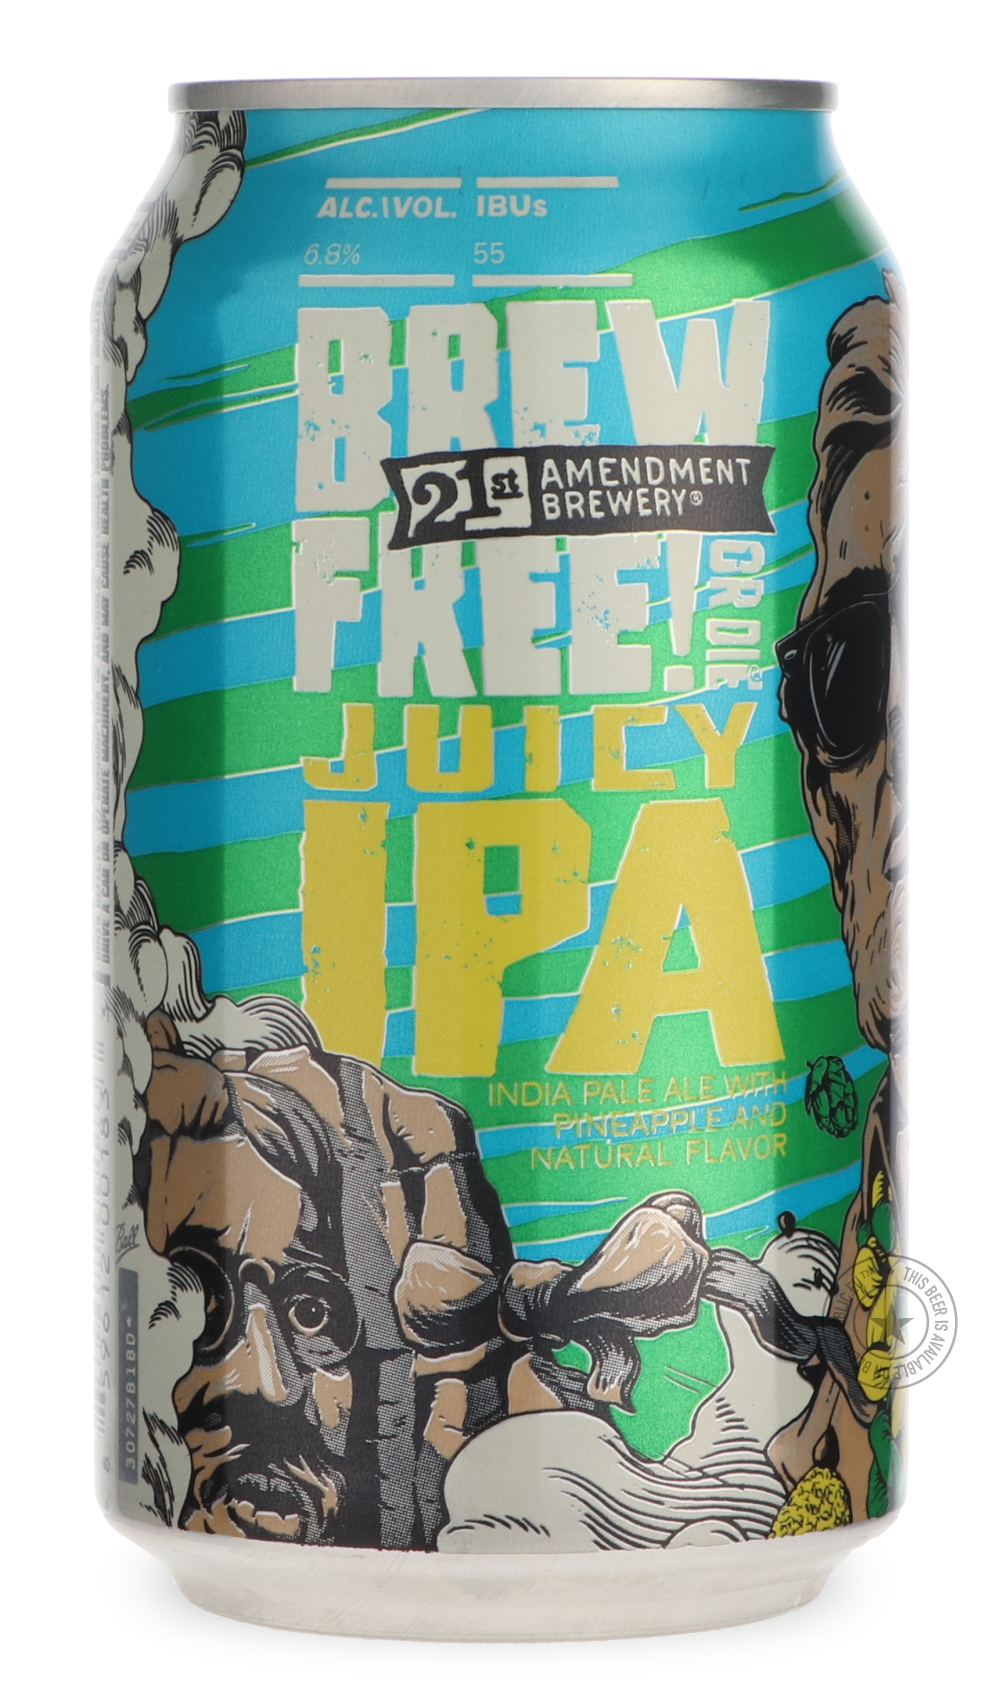 -21st Amendment- Brew Free! or Die Juicy IPA-IPA- Only @ Beer Republic - The best online beer store for American & Canadian craft beer - Buy beer online from the USA and Canada - Bier online kopen - Amerikaans bier kopen - Craft beer store - Craft beer kopen - Amerikanisch bier kaufen - Bier online kaufen - Acheter biere online - IPA - Stout - Porter - New England IPA - Hazy IPA - Imperial Stout - Barrel Aged - Barrel Aged Imperial Stout - Brown - Dark beer - Blond - Blonde - Pilsner - Lager - Wheat - Weize